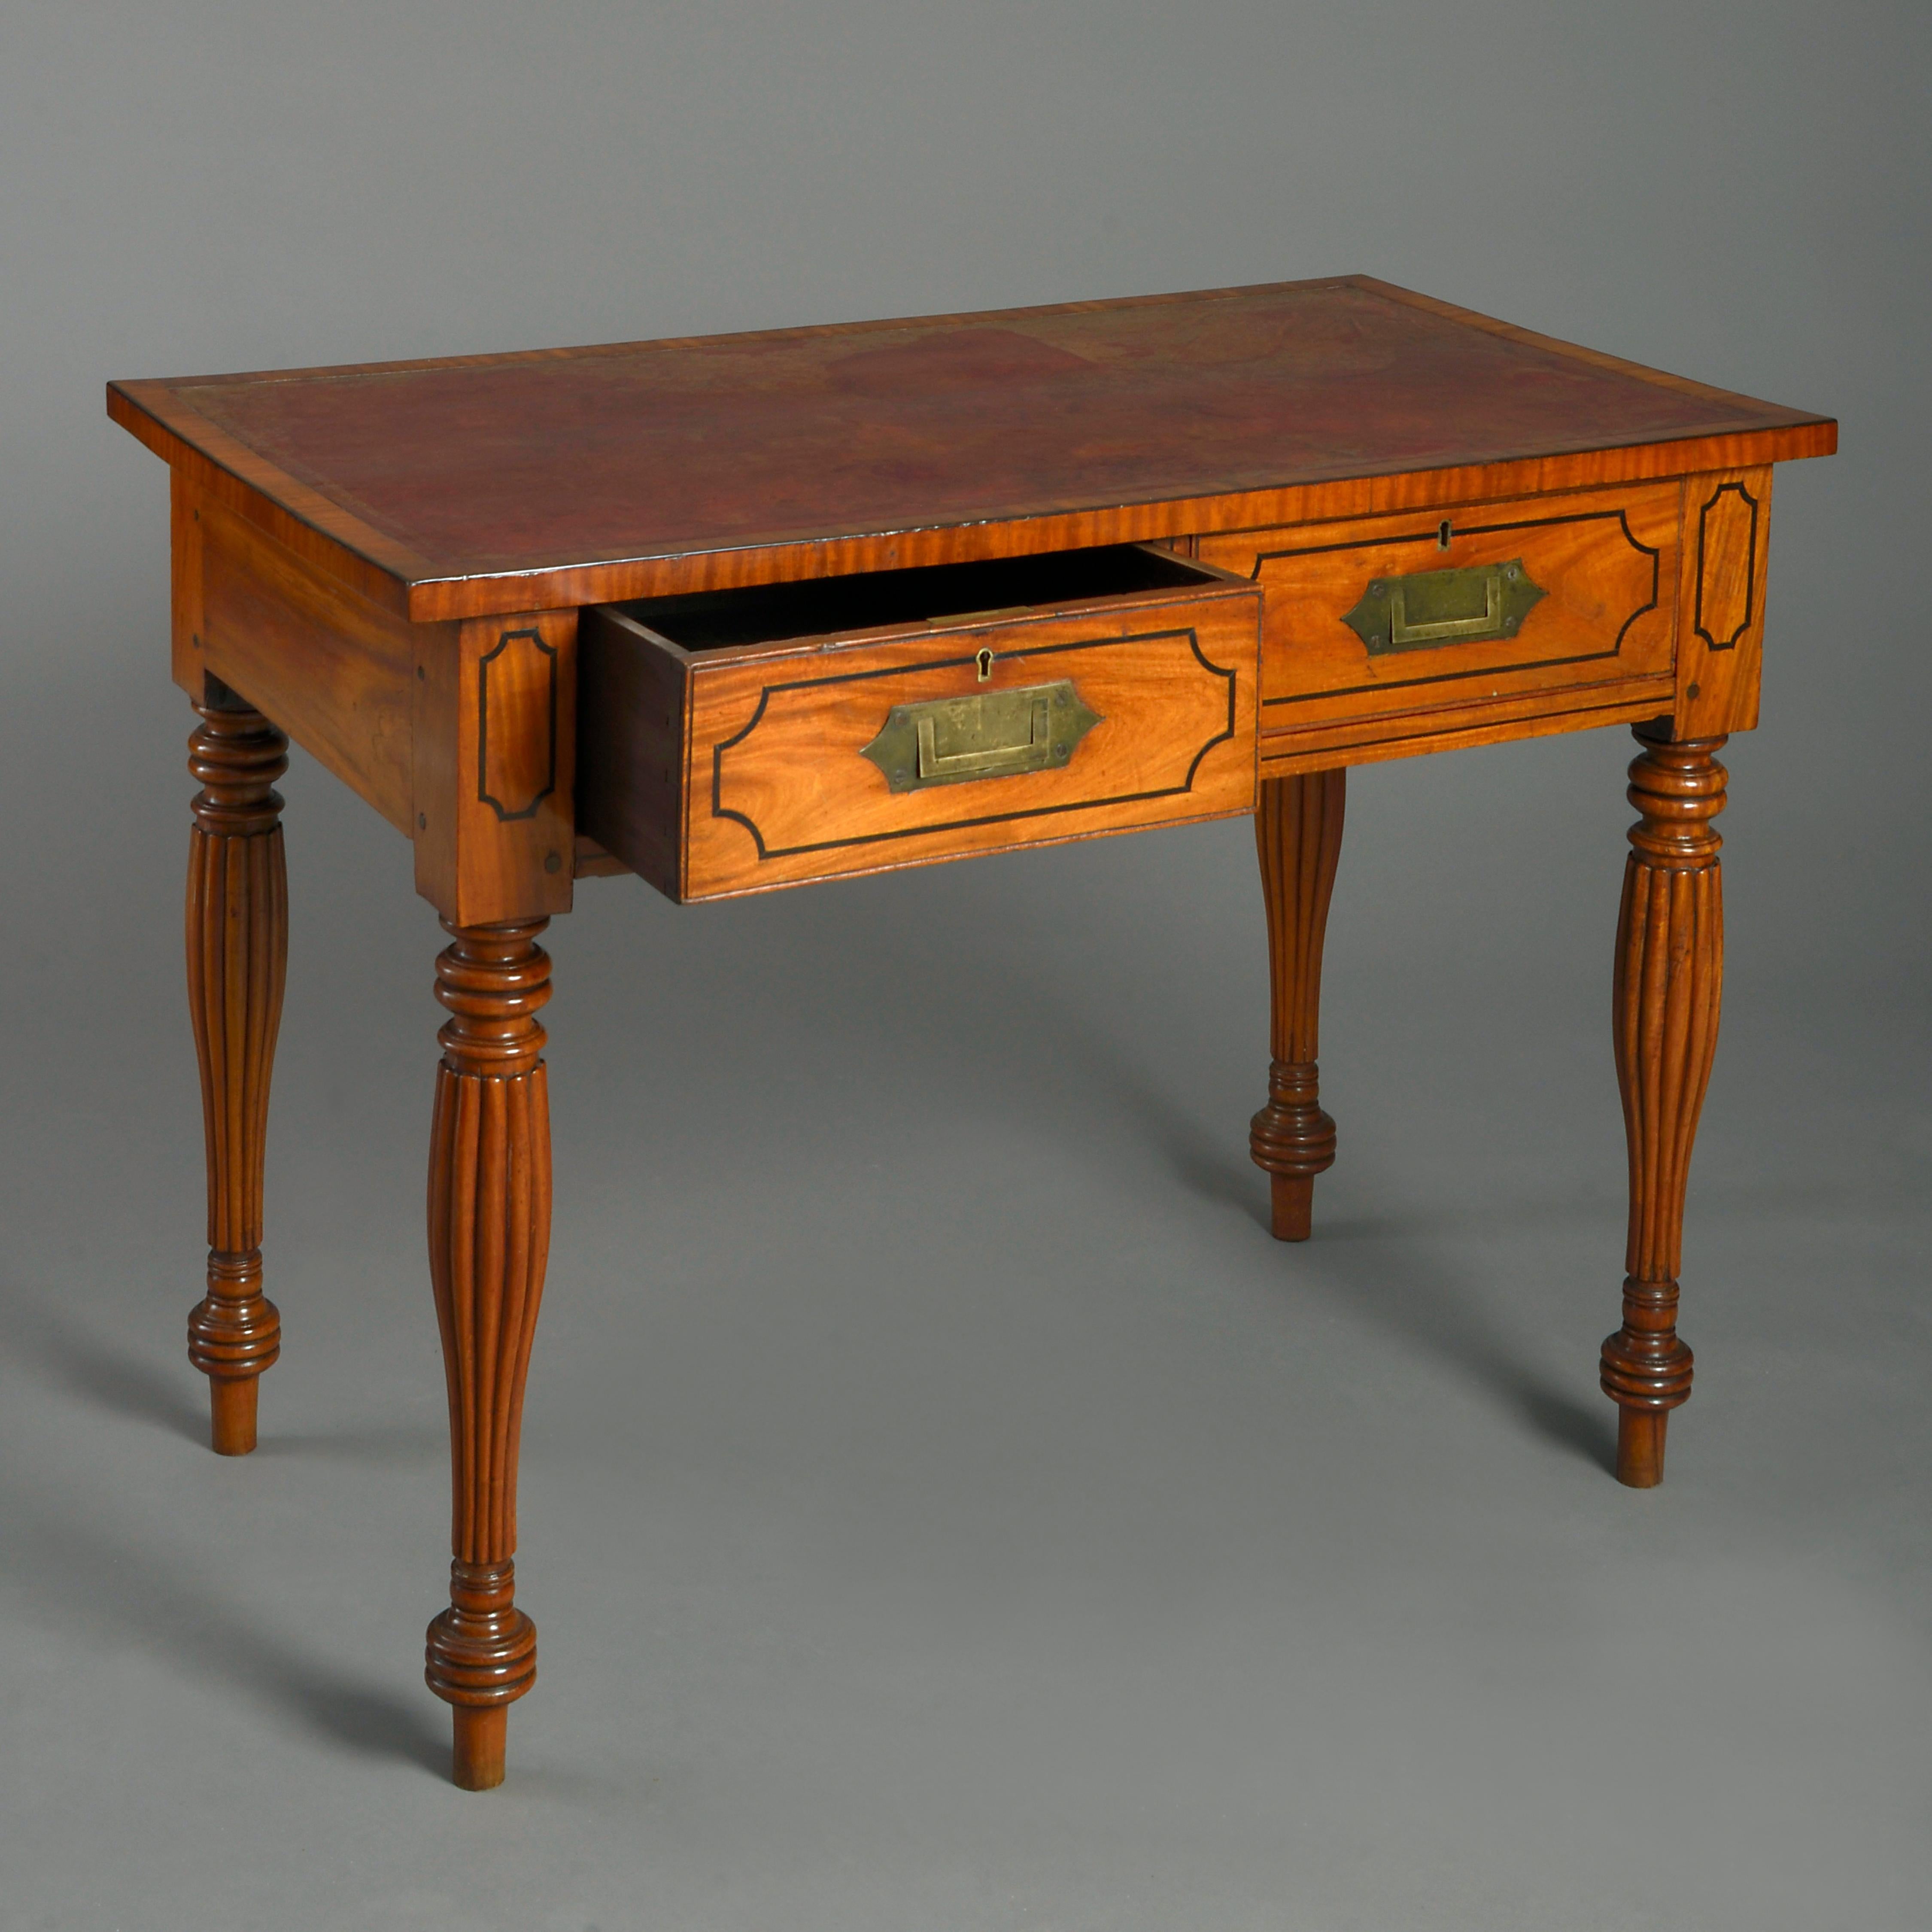 Anglo-Indian Early 19th Century William IV Period Satinwood Campaign Desk